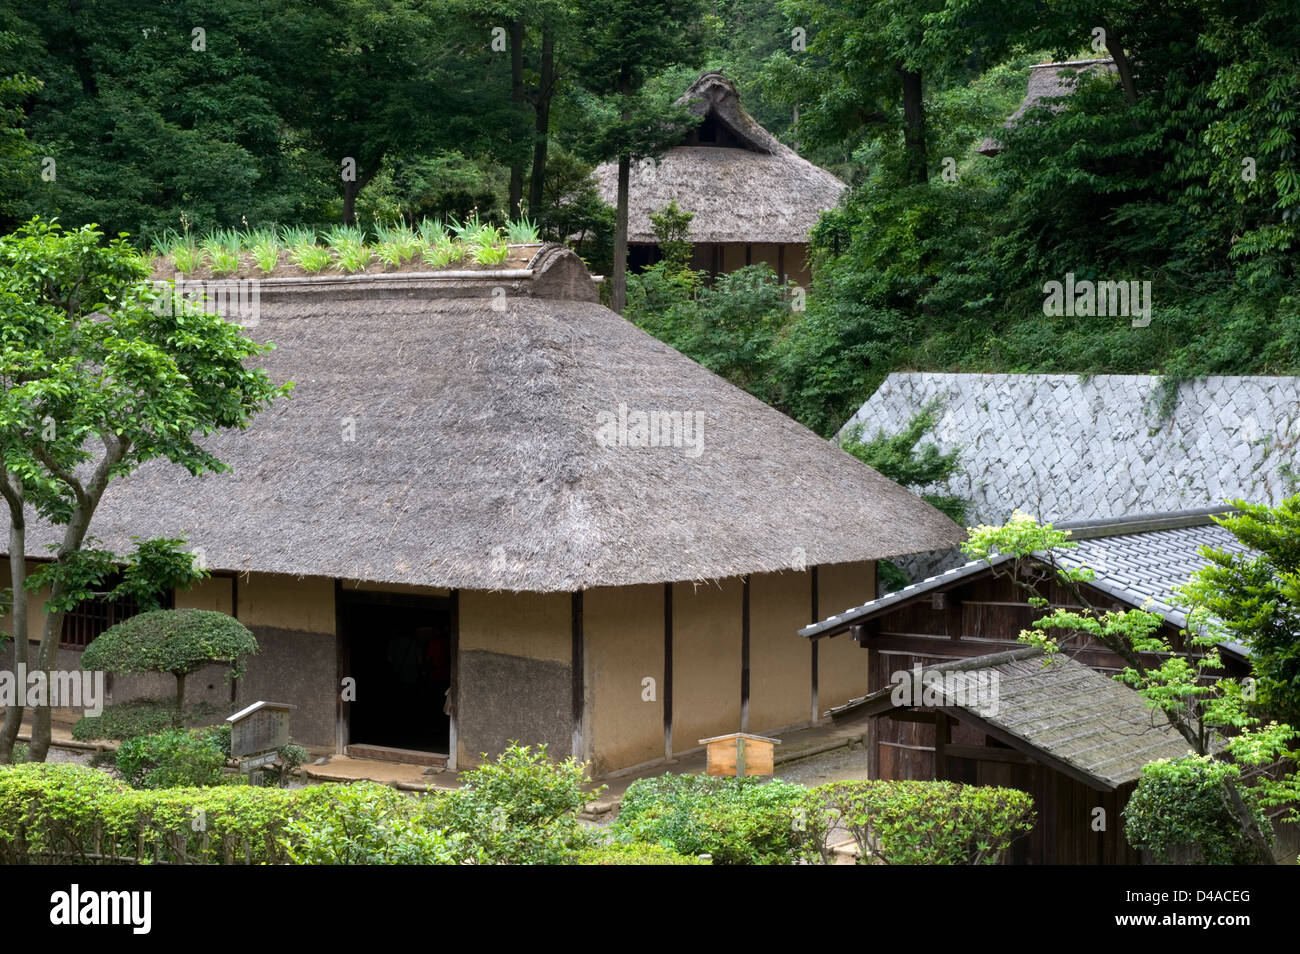 Historic thatched roof countryside village residences in forest setting at Nihon Minkaen (Open-air Folk House Museum) Stock Photo